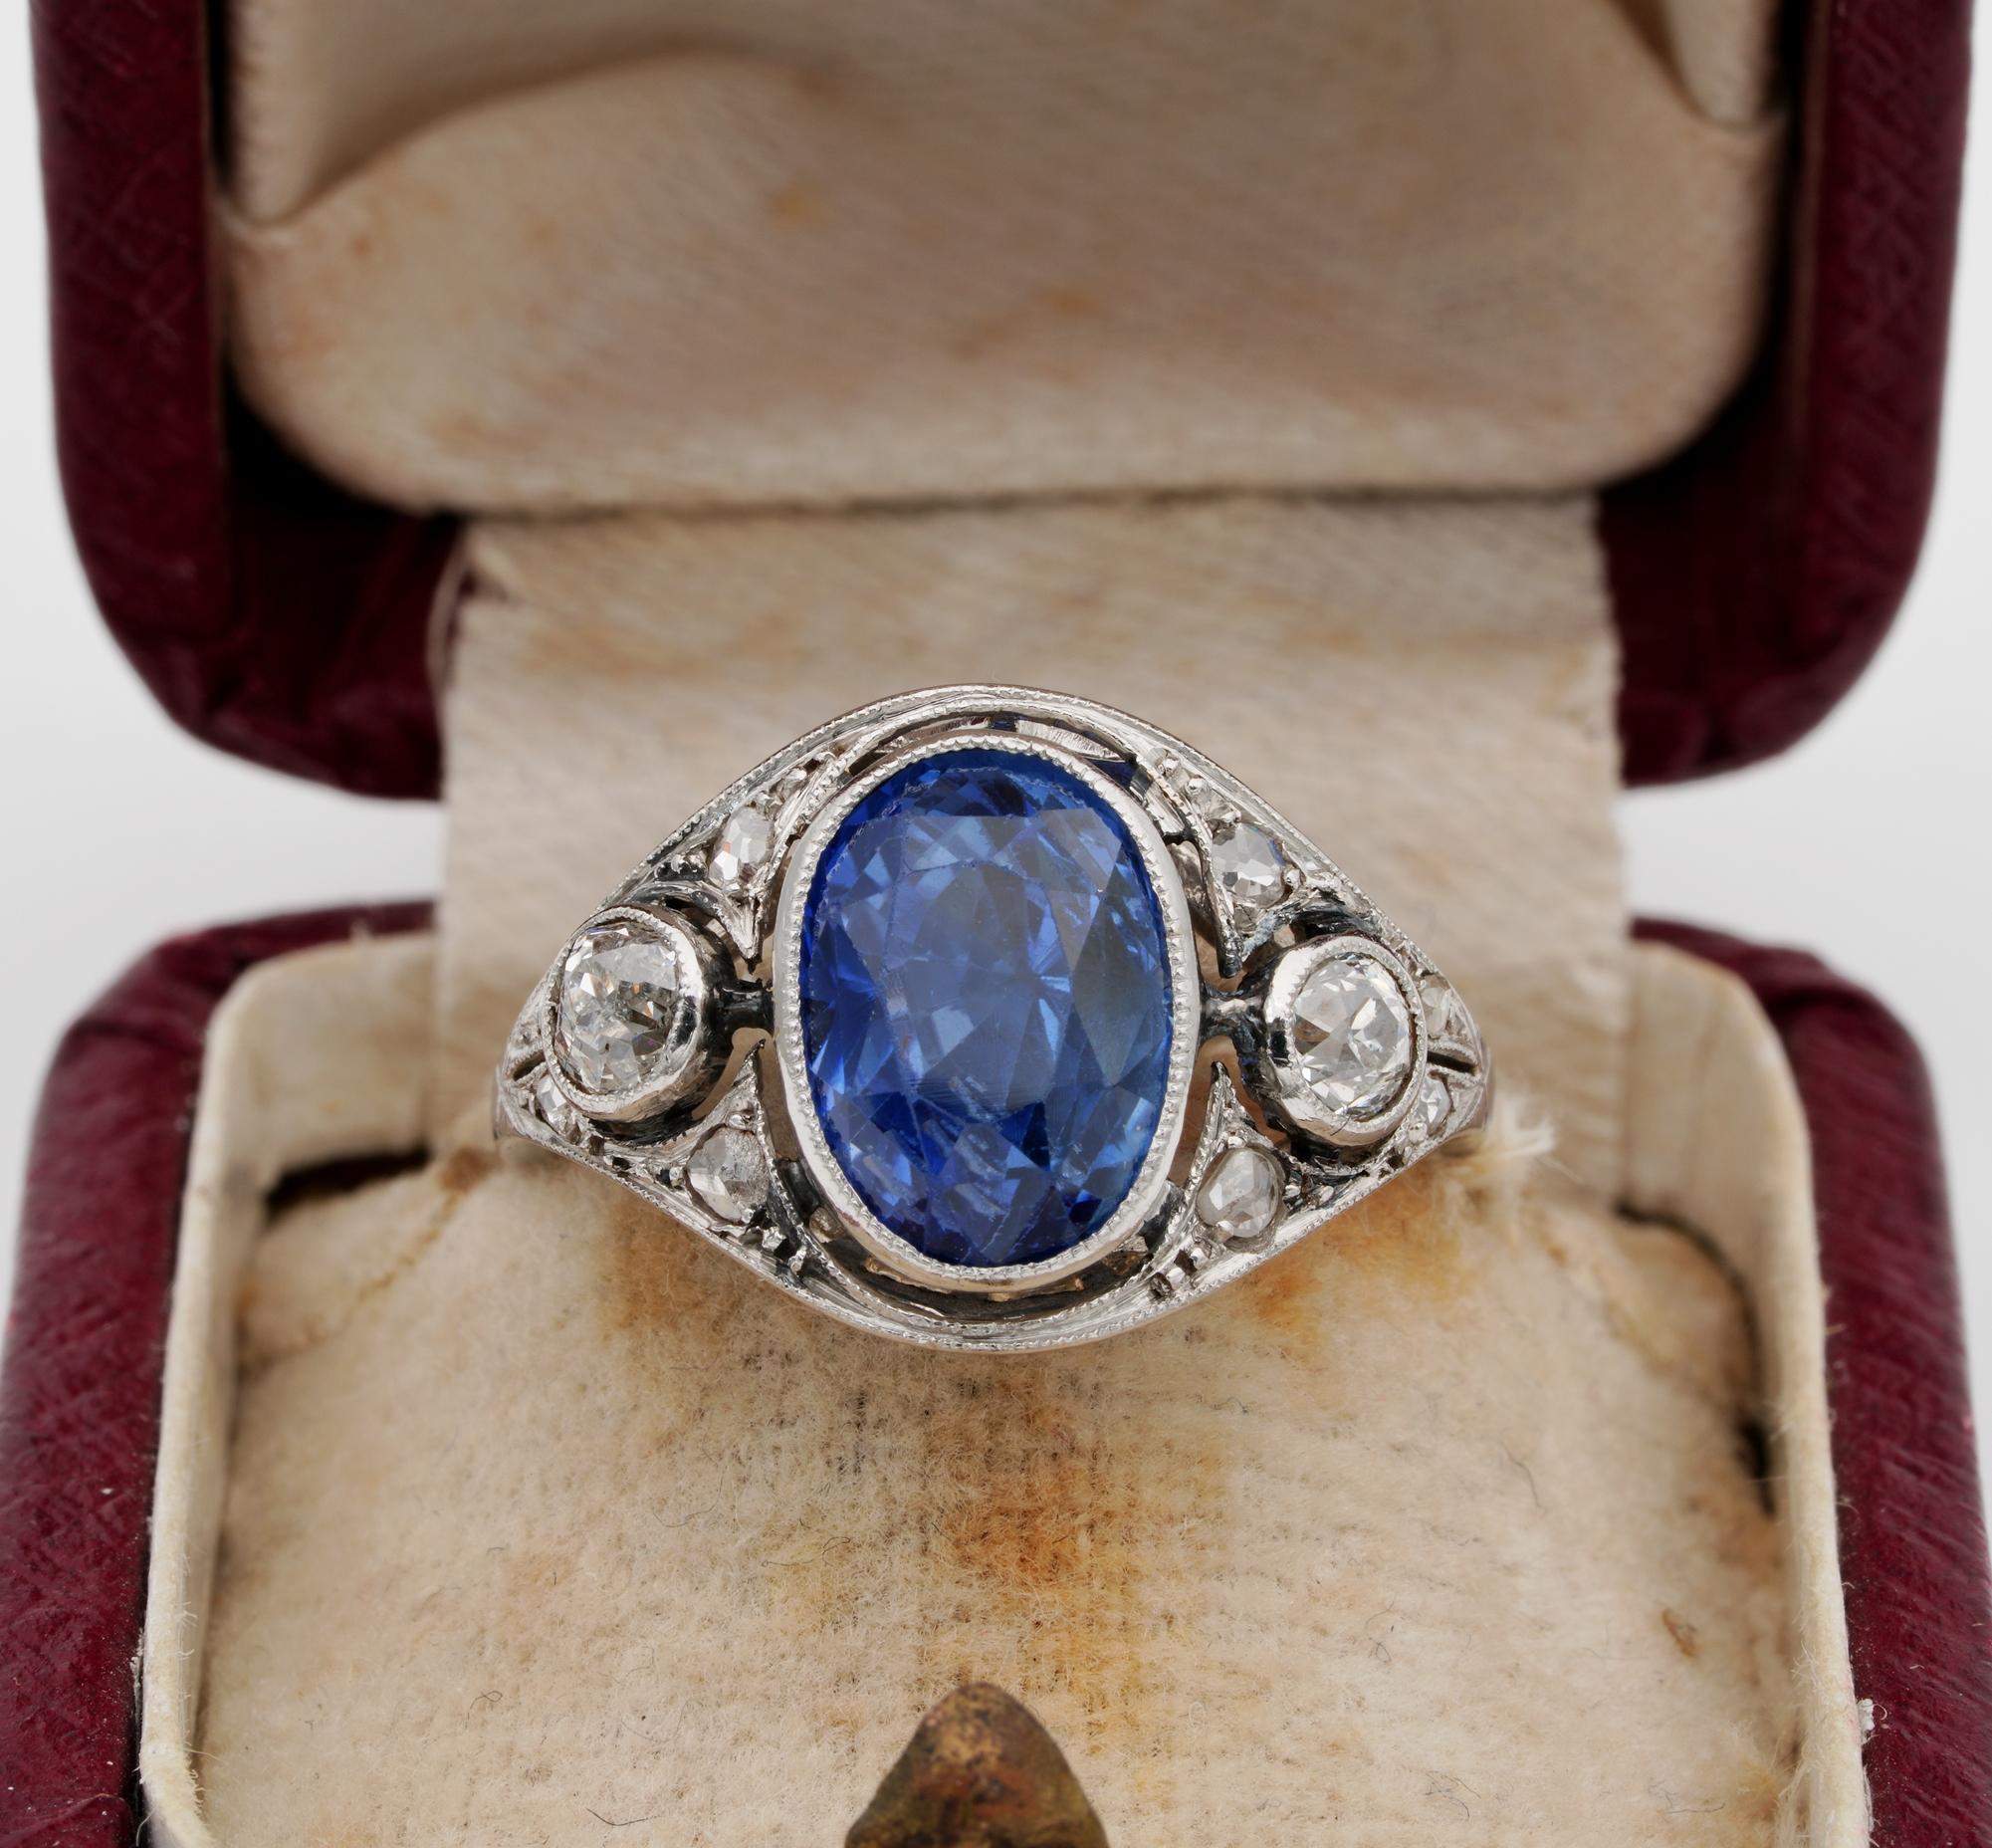 Price mistaken, sorry.
Past Remembrance
Absolute Edwardian at purest level, this exquisite example comes to us with all its beauty and charm intact, suitable for engagement, anniversary, birthstone or just as life investment
Gorgeous hand made